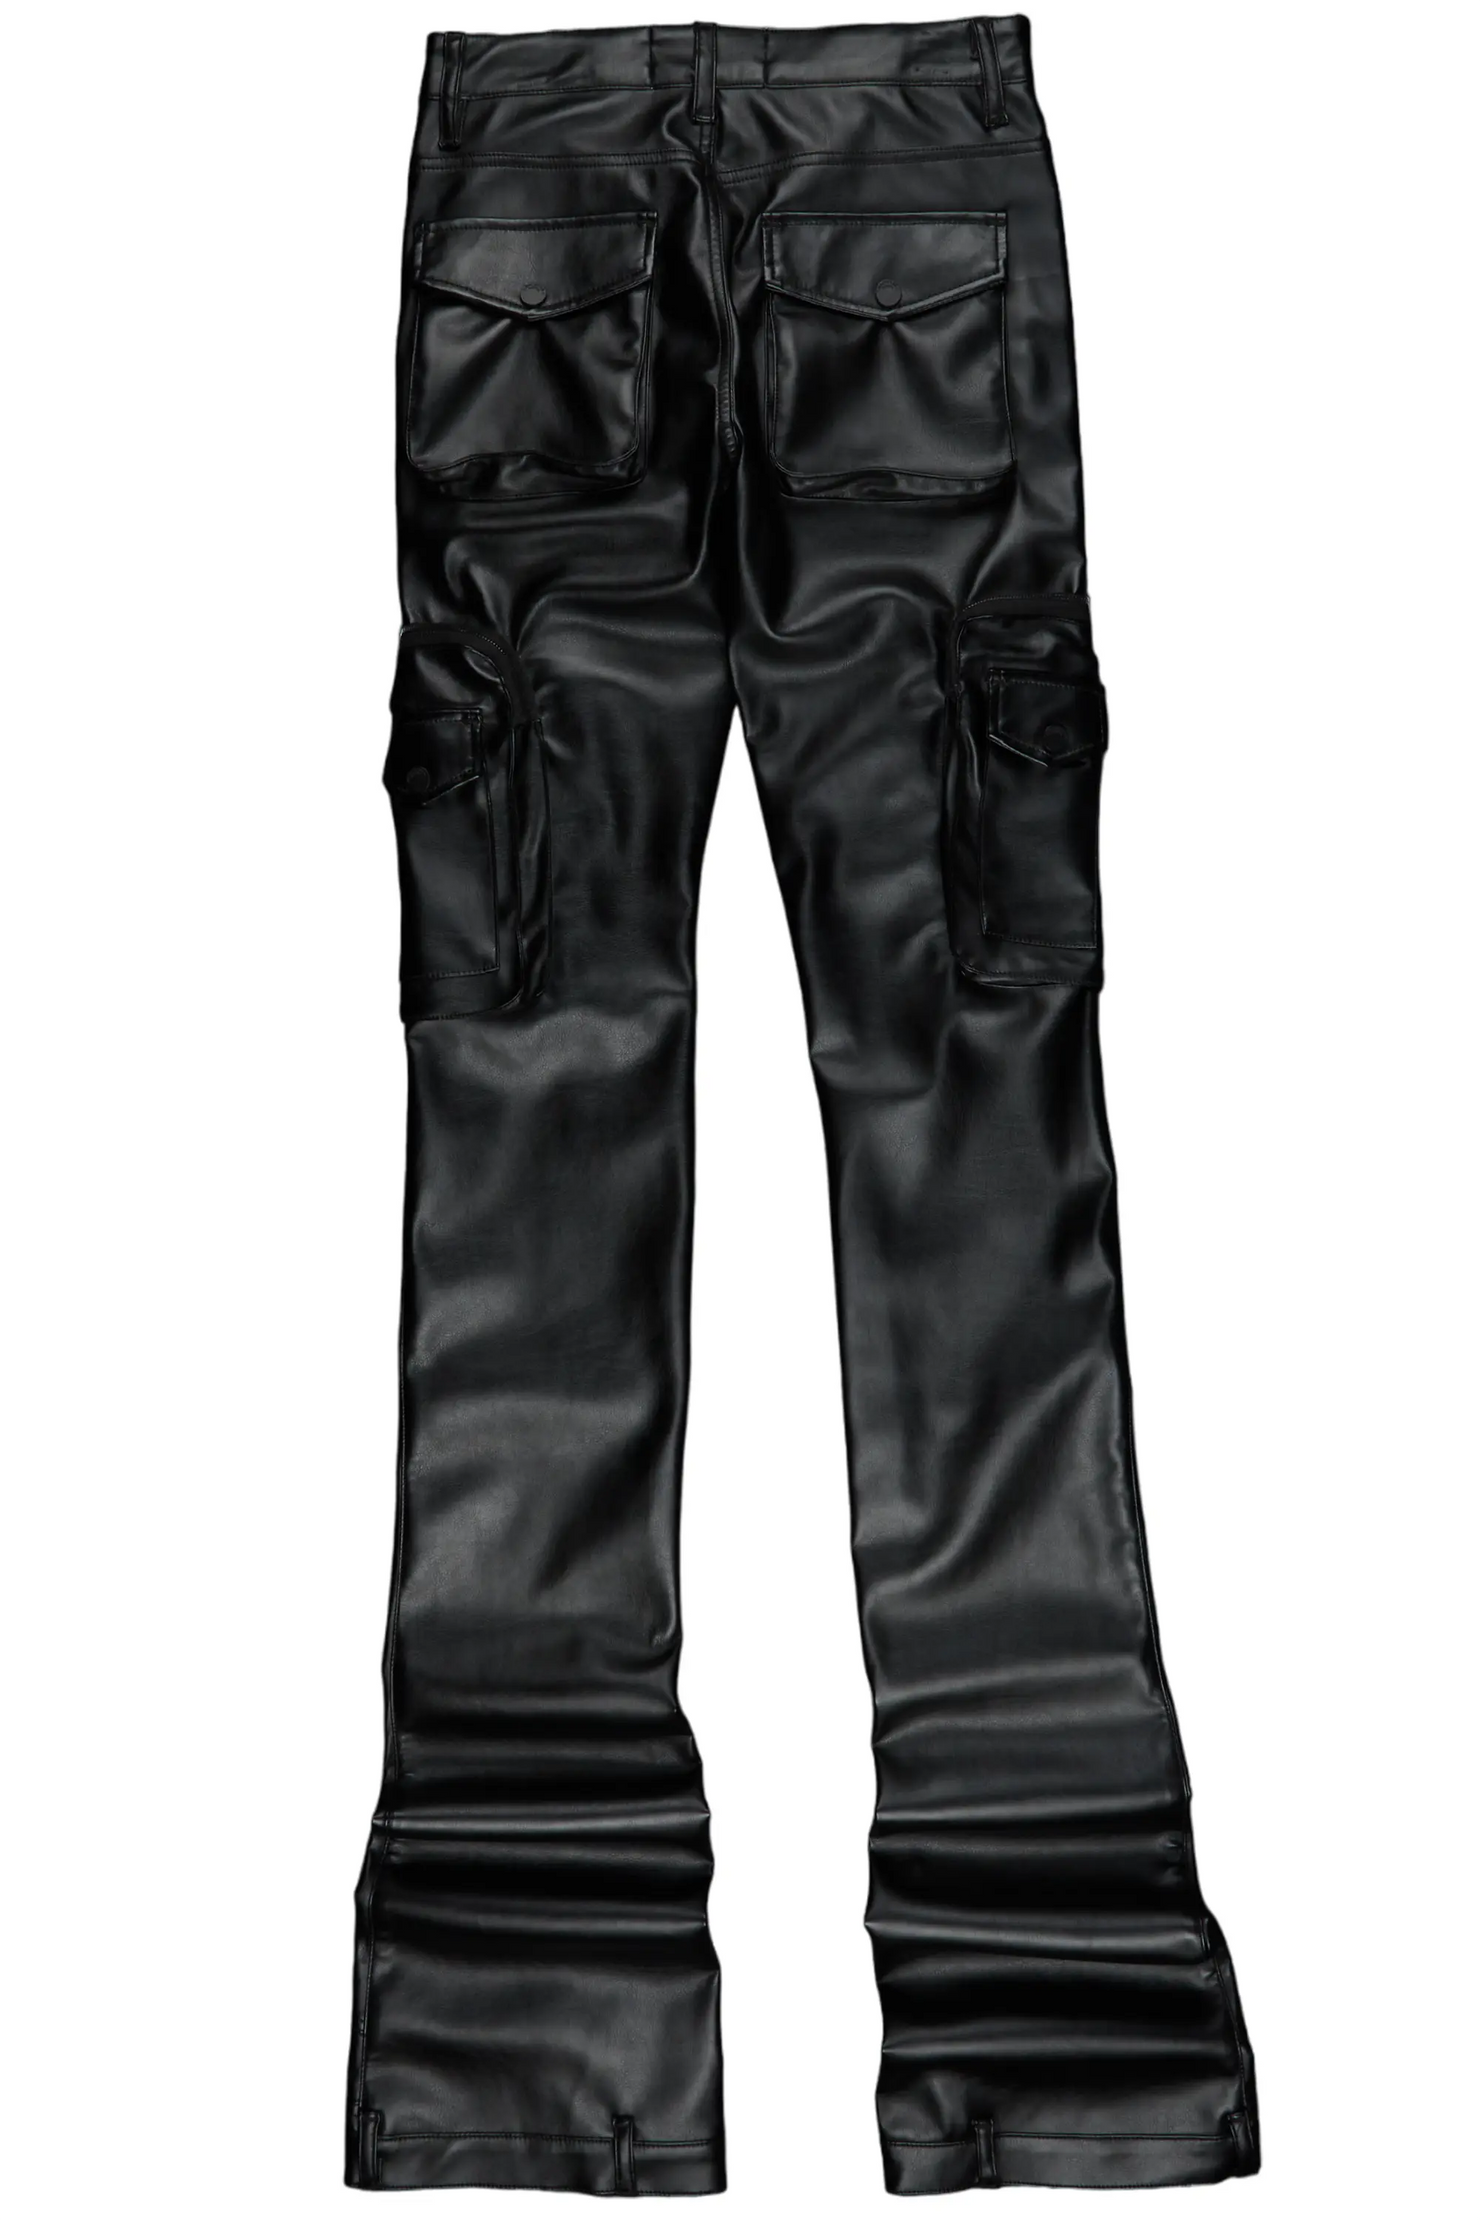 Sutton Black Faux Leather Super Stacked Jean